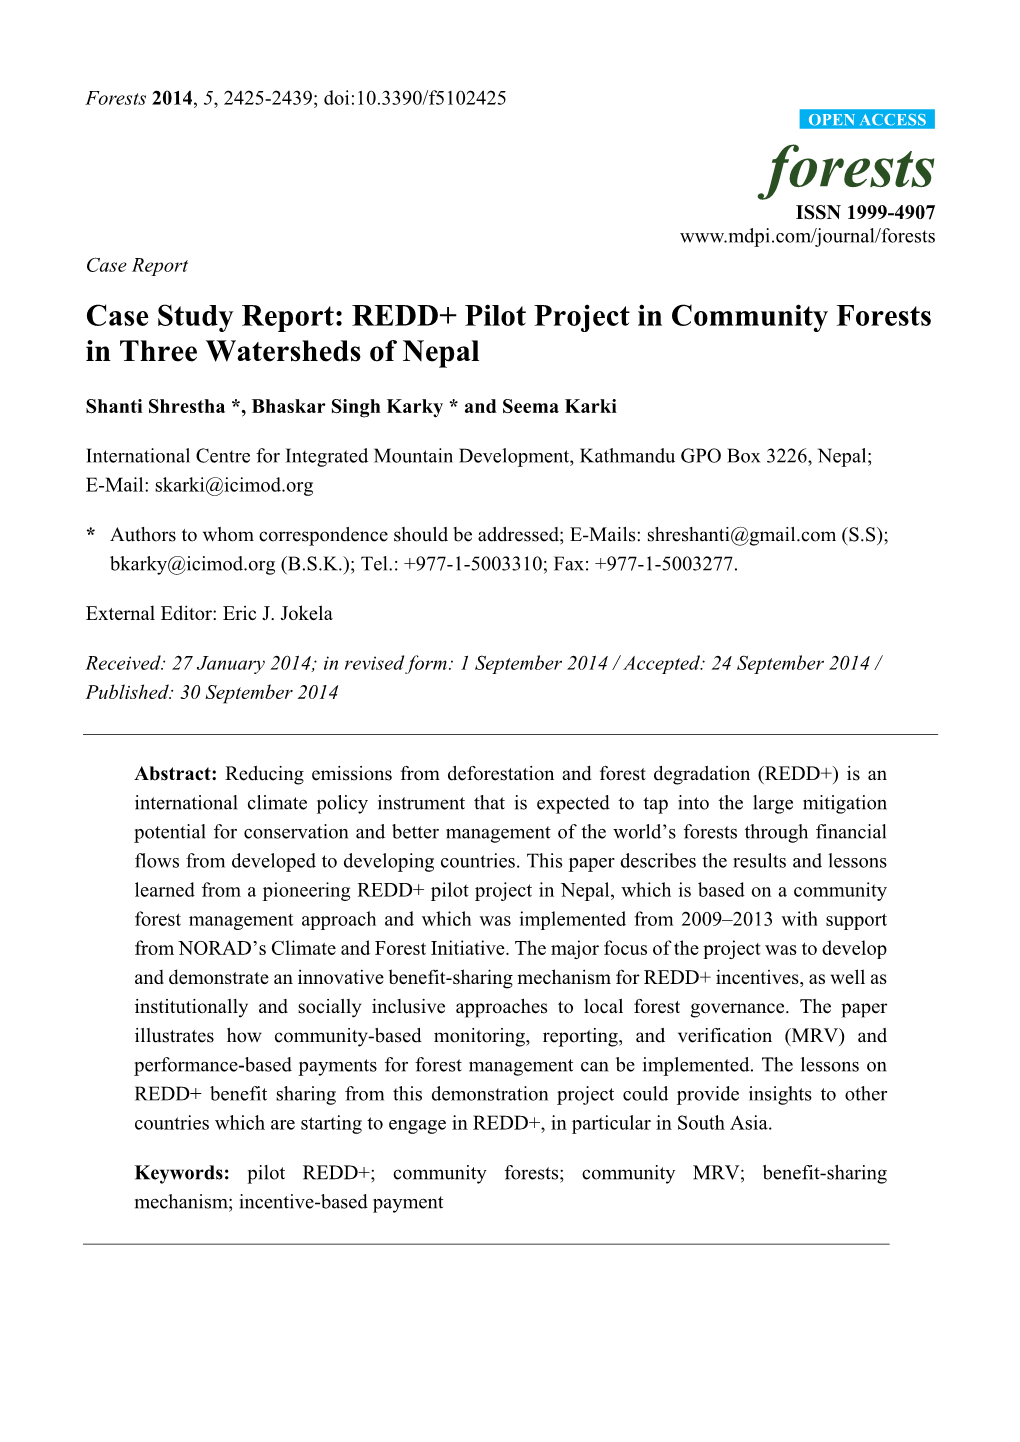 REDD+ Pilot Project in Community Forests in Three Watersheds of Nepal